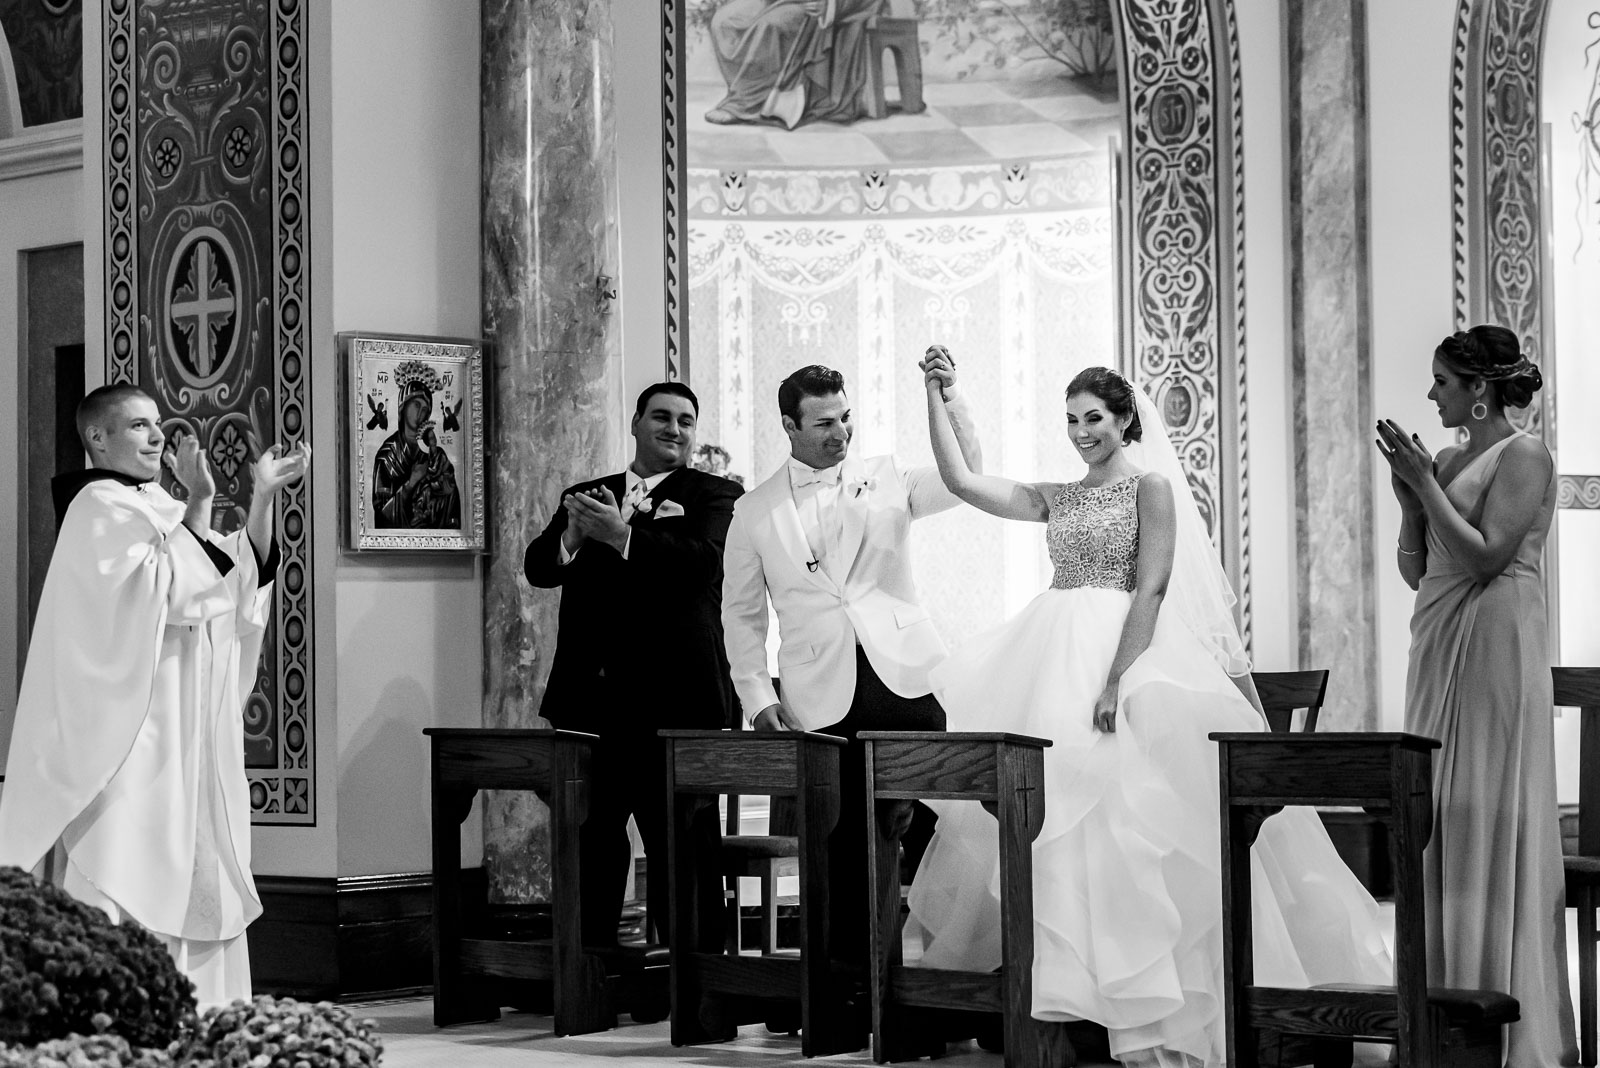 Bride and groom celebrate during ceremony